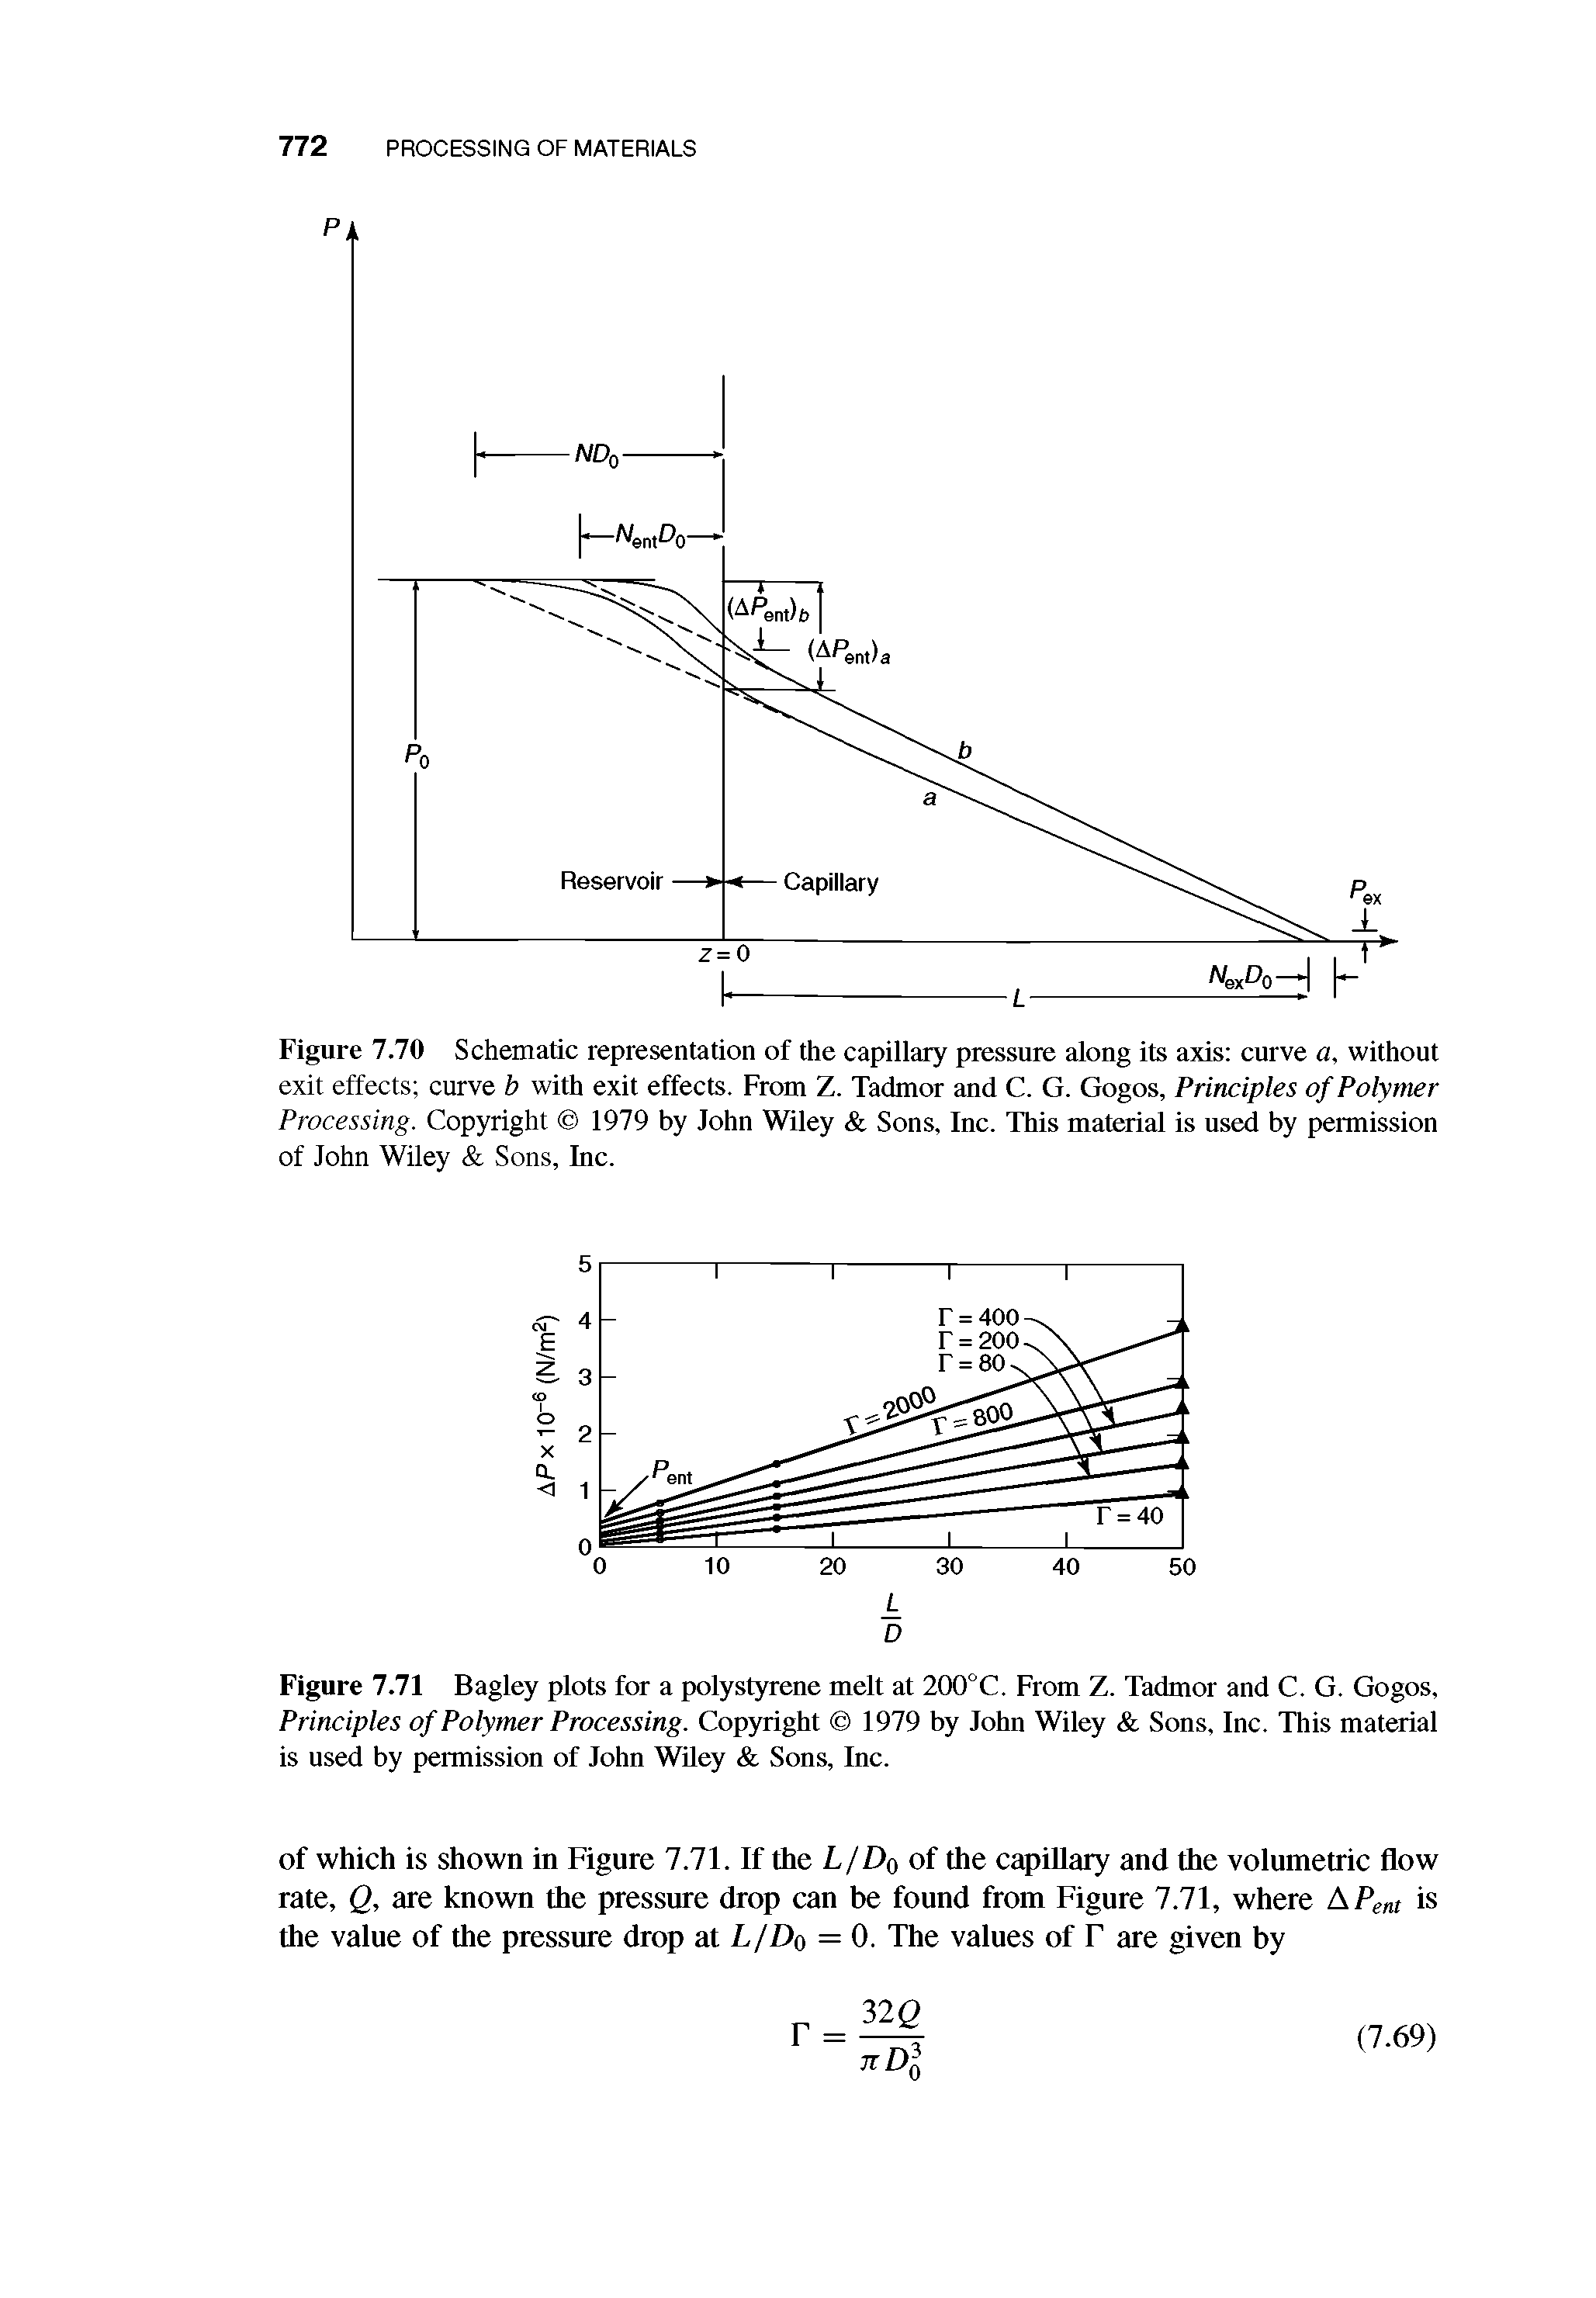 Figure 7.70 Schematic representation of the capillary pressure along its axis curve a, without exit effects curve b with exit effects. From Z. Tadmor and C. G. Gogos, Principles of Polymer Processing. Copyright 1979 by John Wiley Sons, Inc. This material is used by permission of John Wiley Sons, Inc.